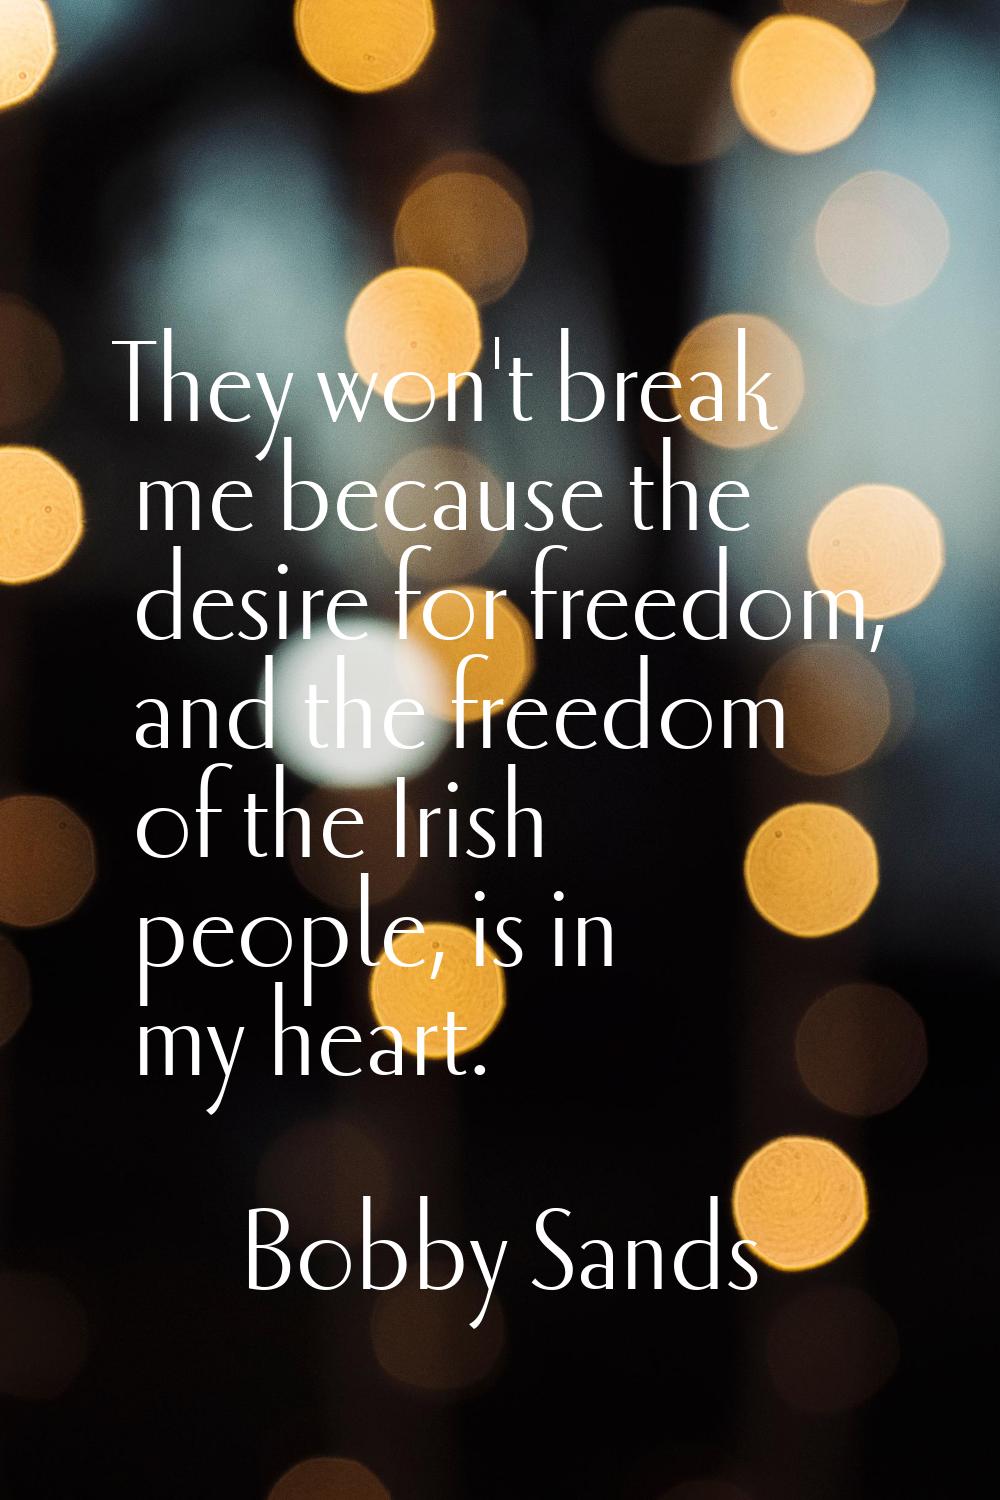 They won't break me because the desire for freedom, and the freedom of the Irish people, is in my h